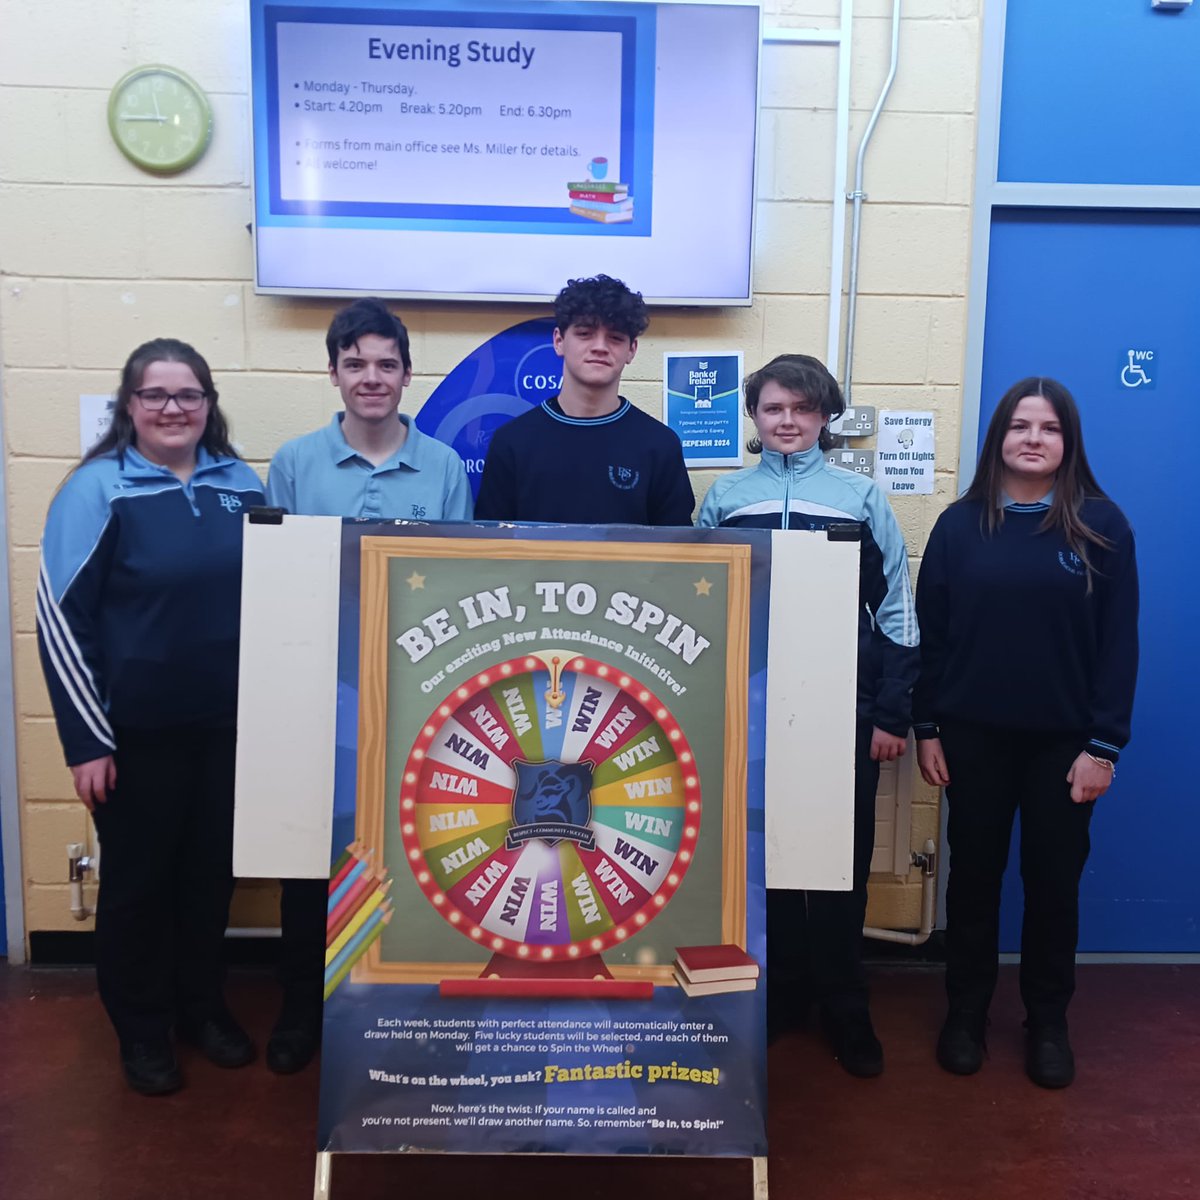 We're now into our 5th Week of our Attendance Initiative 'Be in, to Spin'😊Remember to be in with a chance to spin the wheel you need perfect Attendance each week. Well done to Leah, Colin, Cathal & Adrian Week 3 Winners and Emily, Thomas, Cianan, Conor & Ryleigh Week 4 Winners!